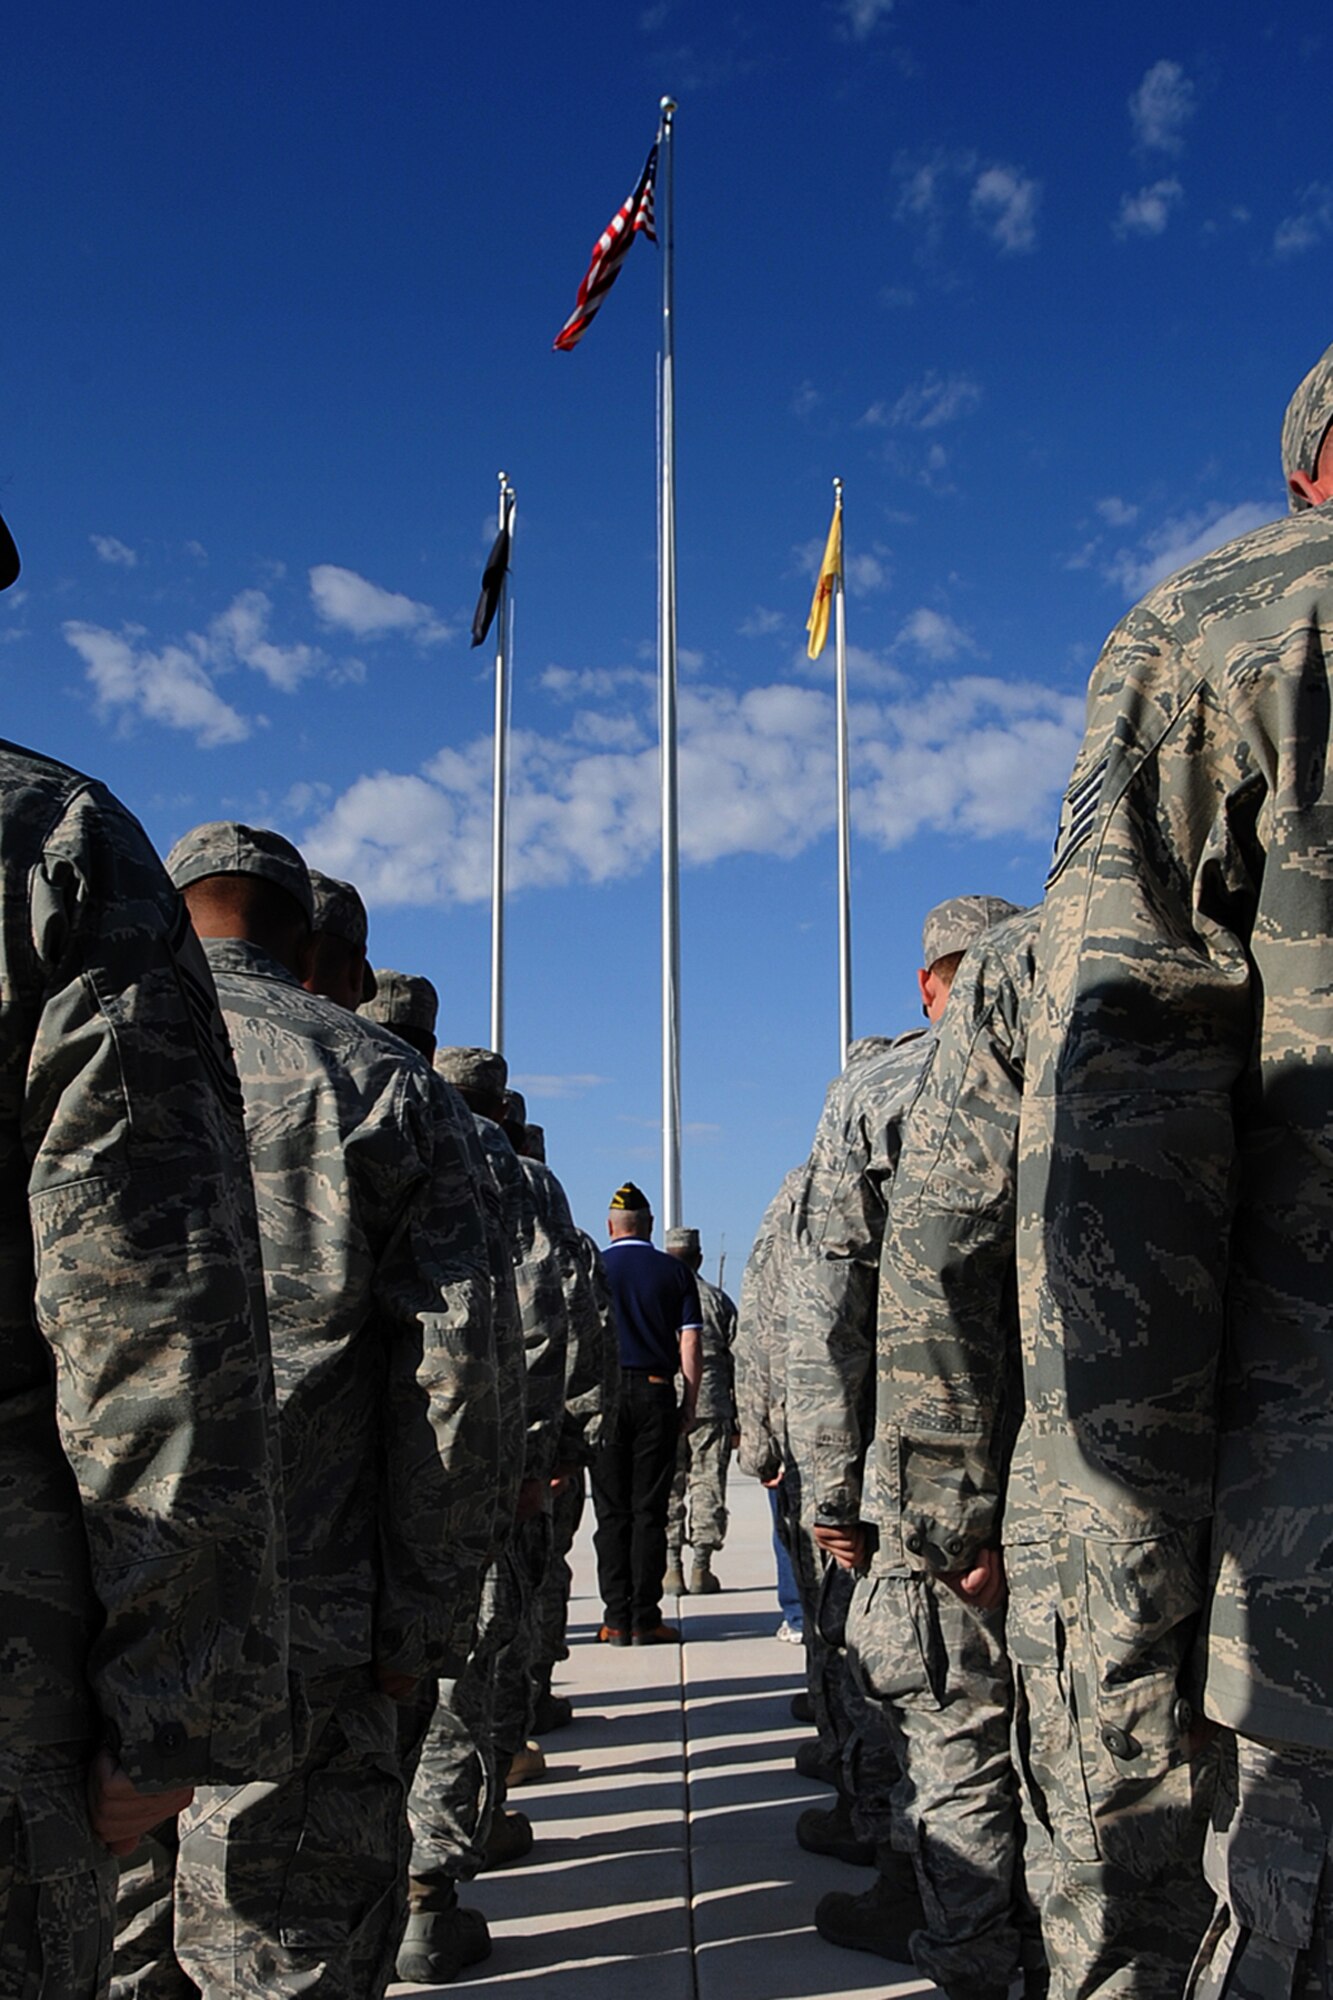 Members of the 49th Fighter Wing stand in formation during the Prisoners of War/ Missing in Action Day ceremony held September 23  at Holloman AFB, N.M. (U.S. Air Force photo/ Staff Sgt. Chris Flahive)